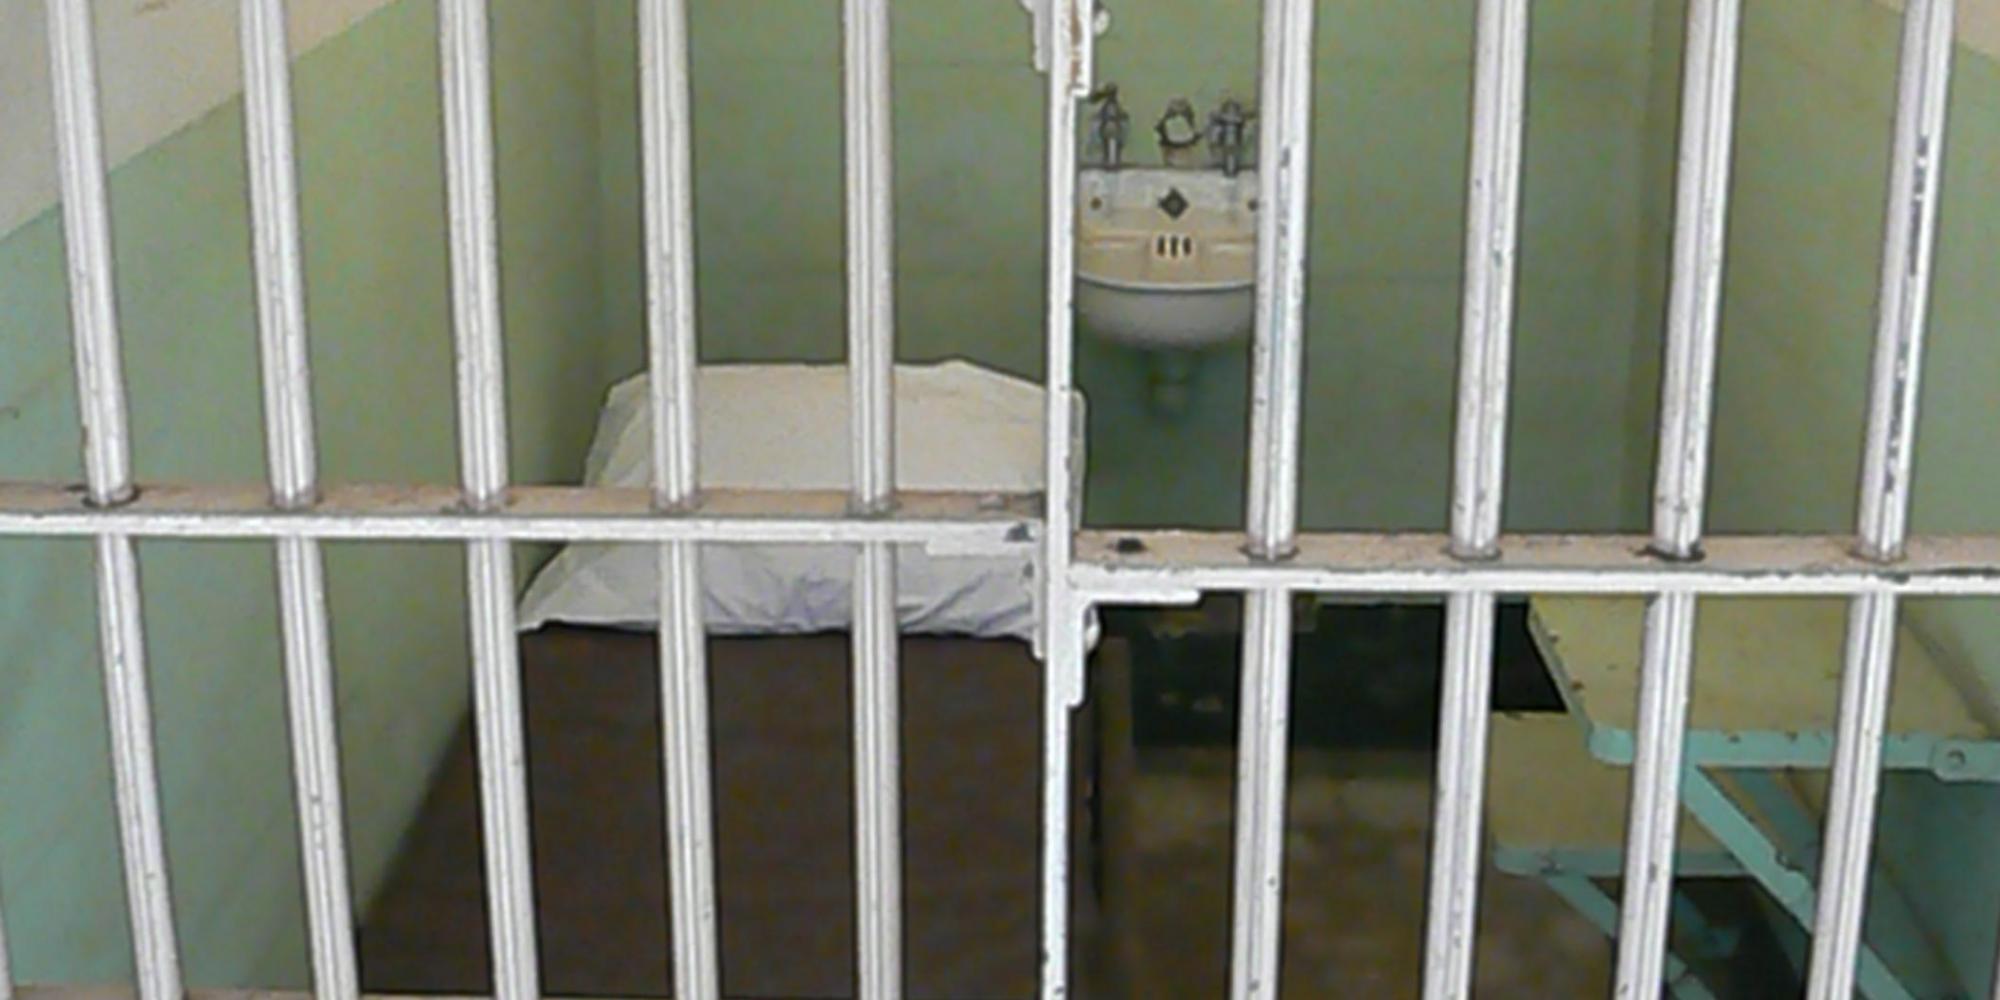 New Efforts Aim To Keep The Mentally Ill Out Of Jail | The Huffington Post